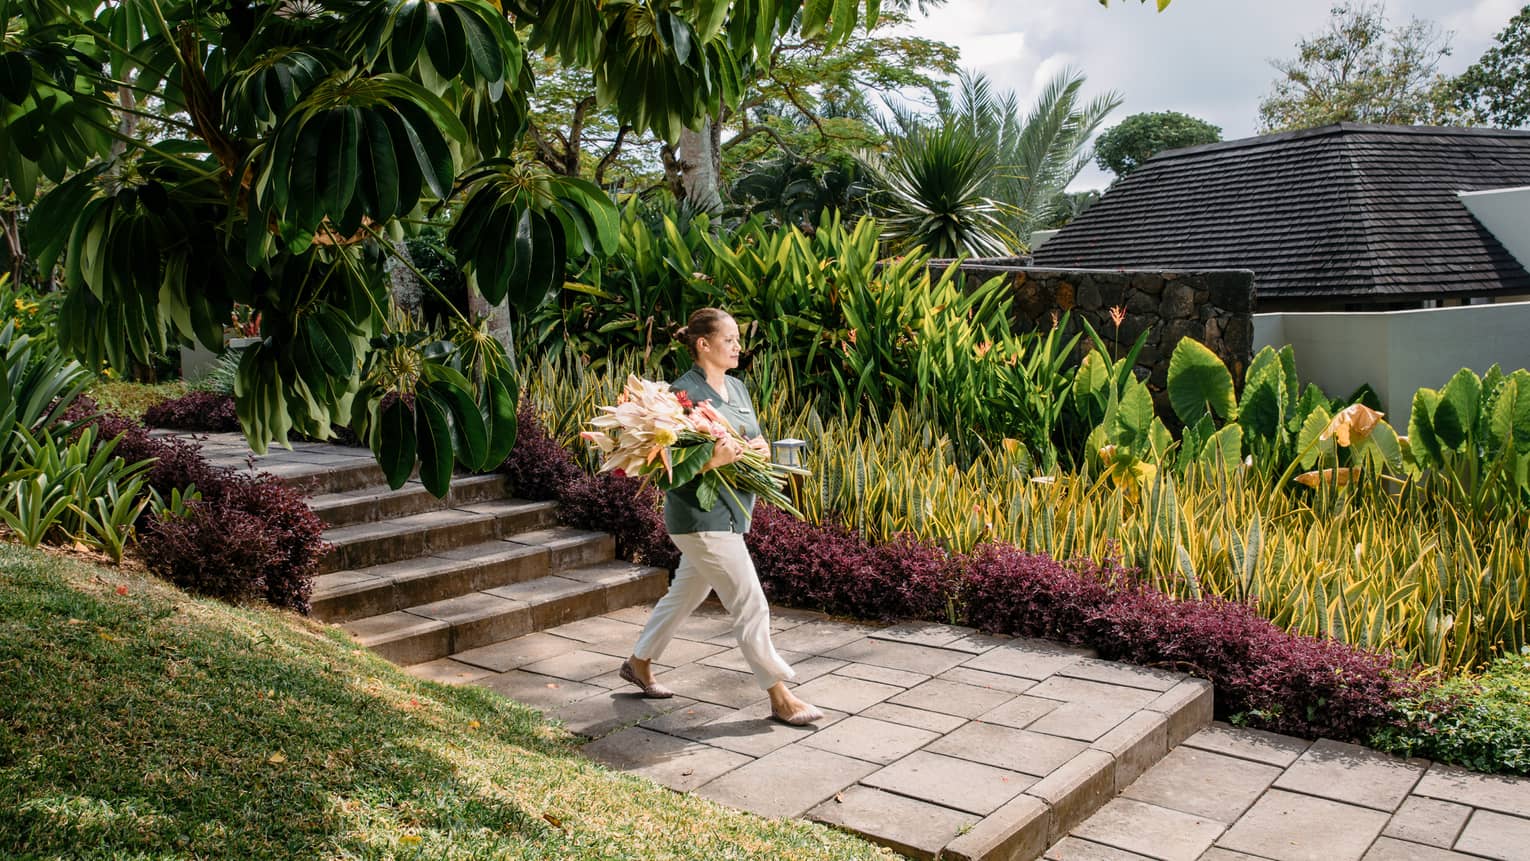 Hotel staff carries large bouquet of tropical flowers down brick path in garden